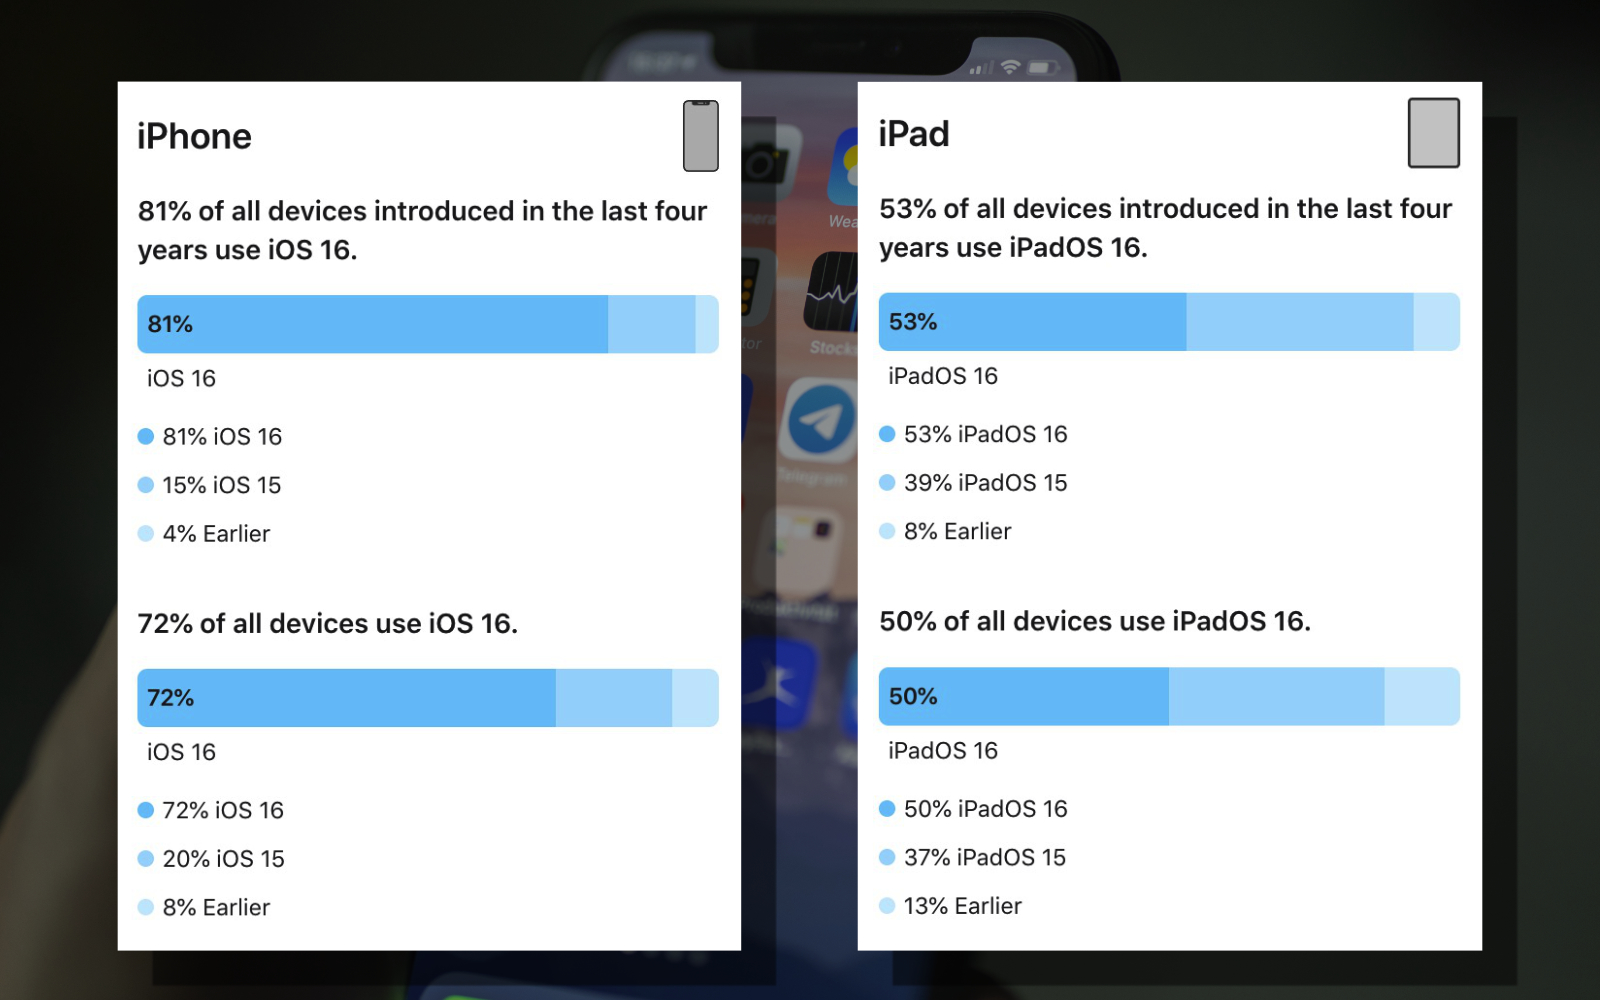 Ios16 share for ipad and iphone